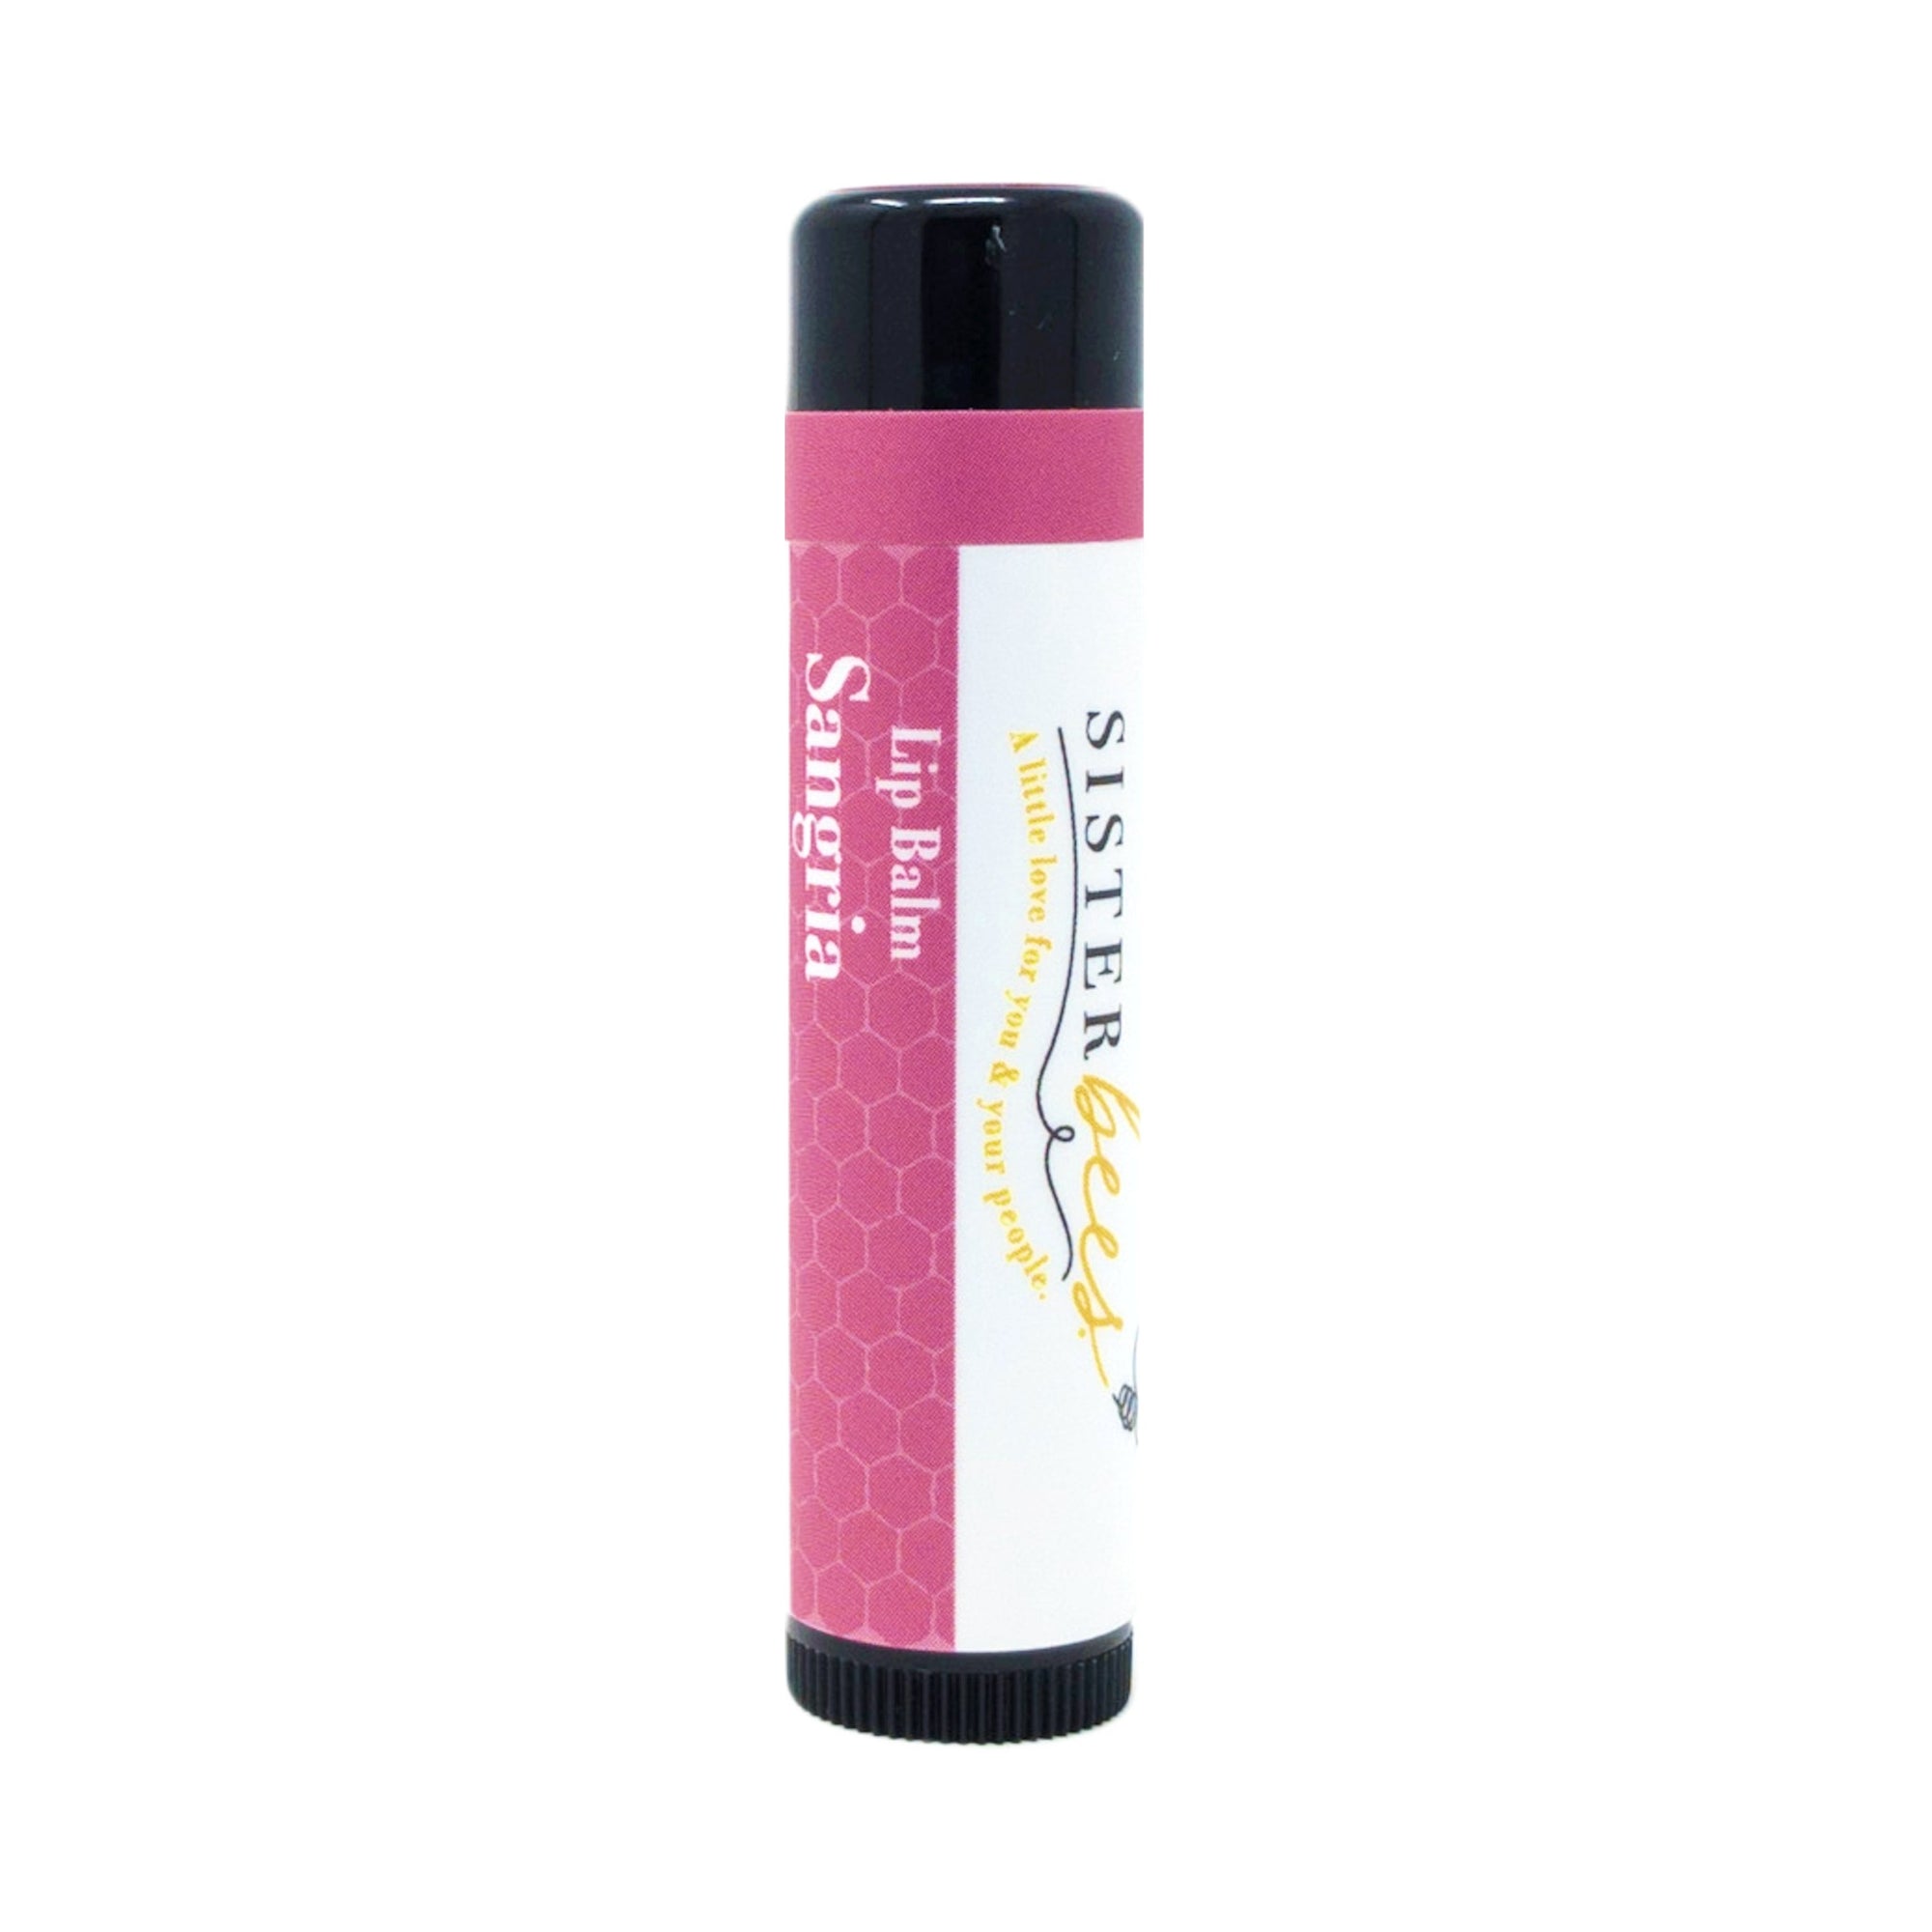 Sangria All Natural Beeswax Lip Balm - The Roadside